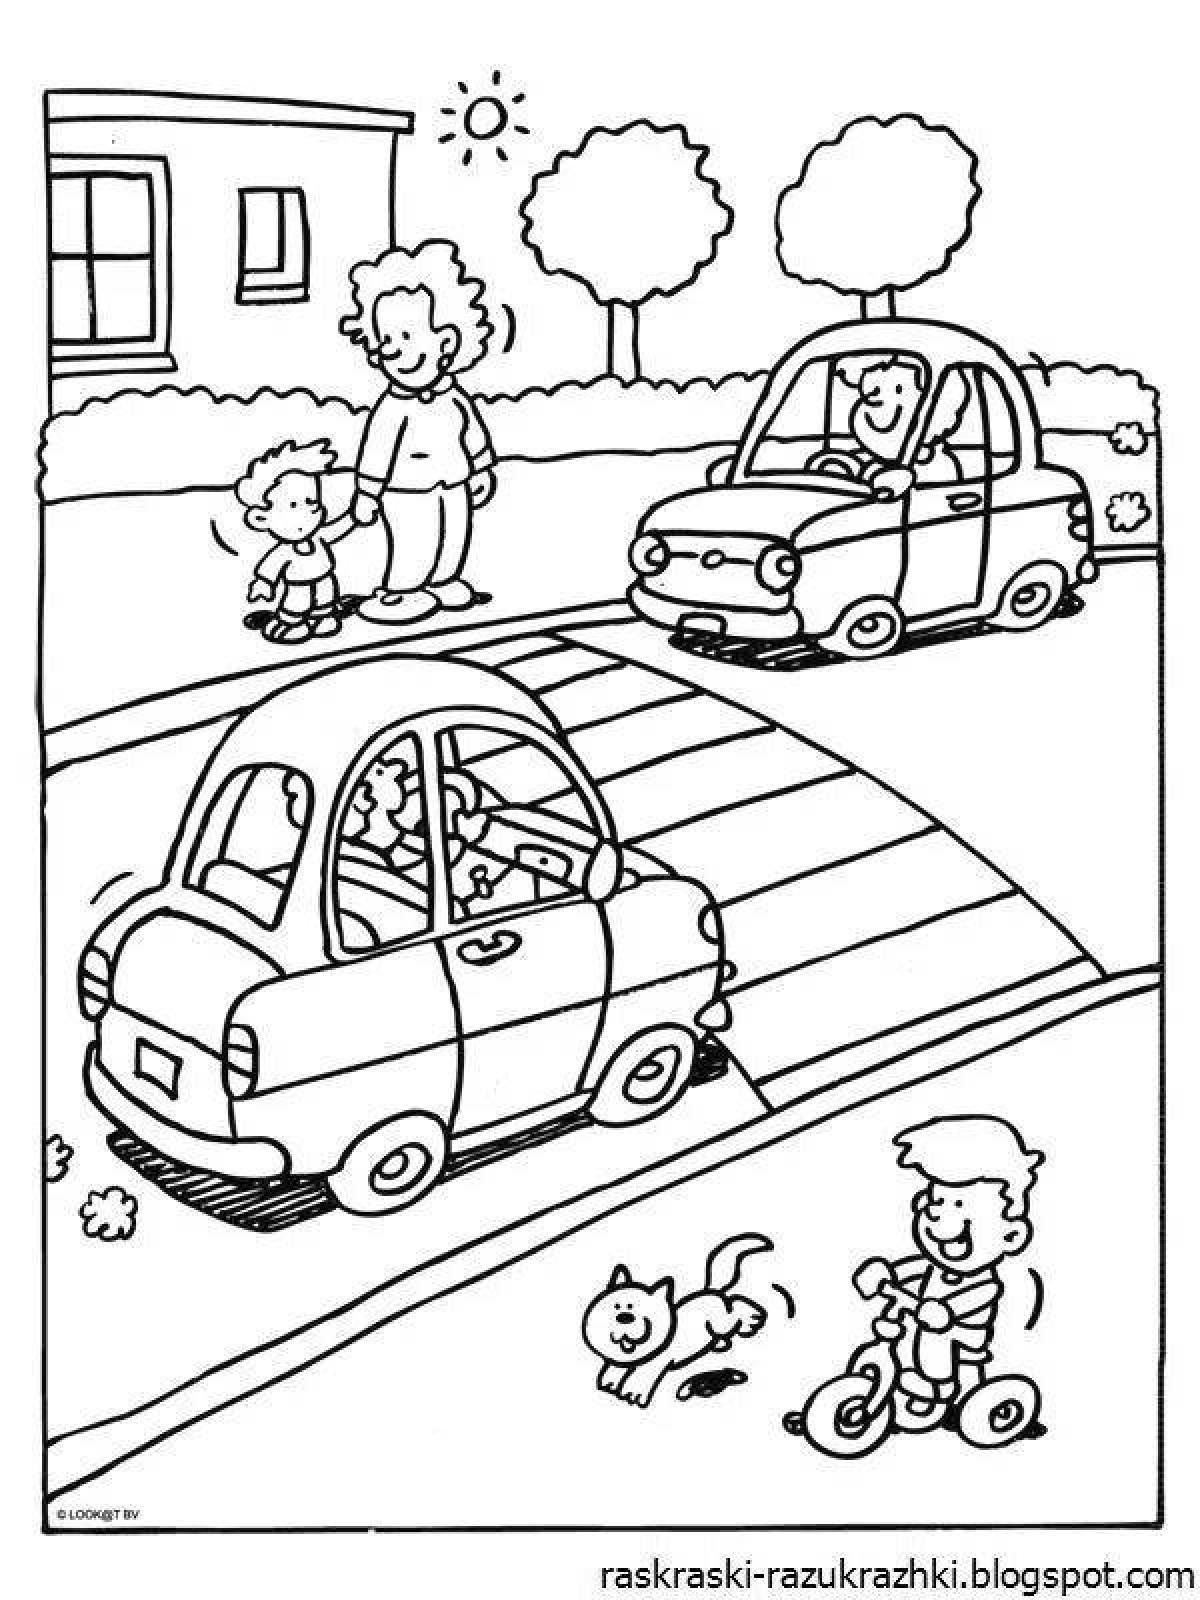 Traveling safety coloring page